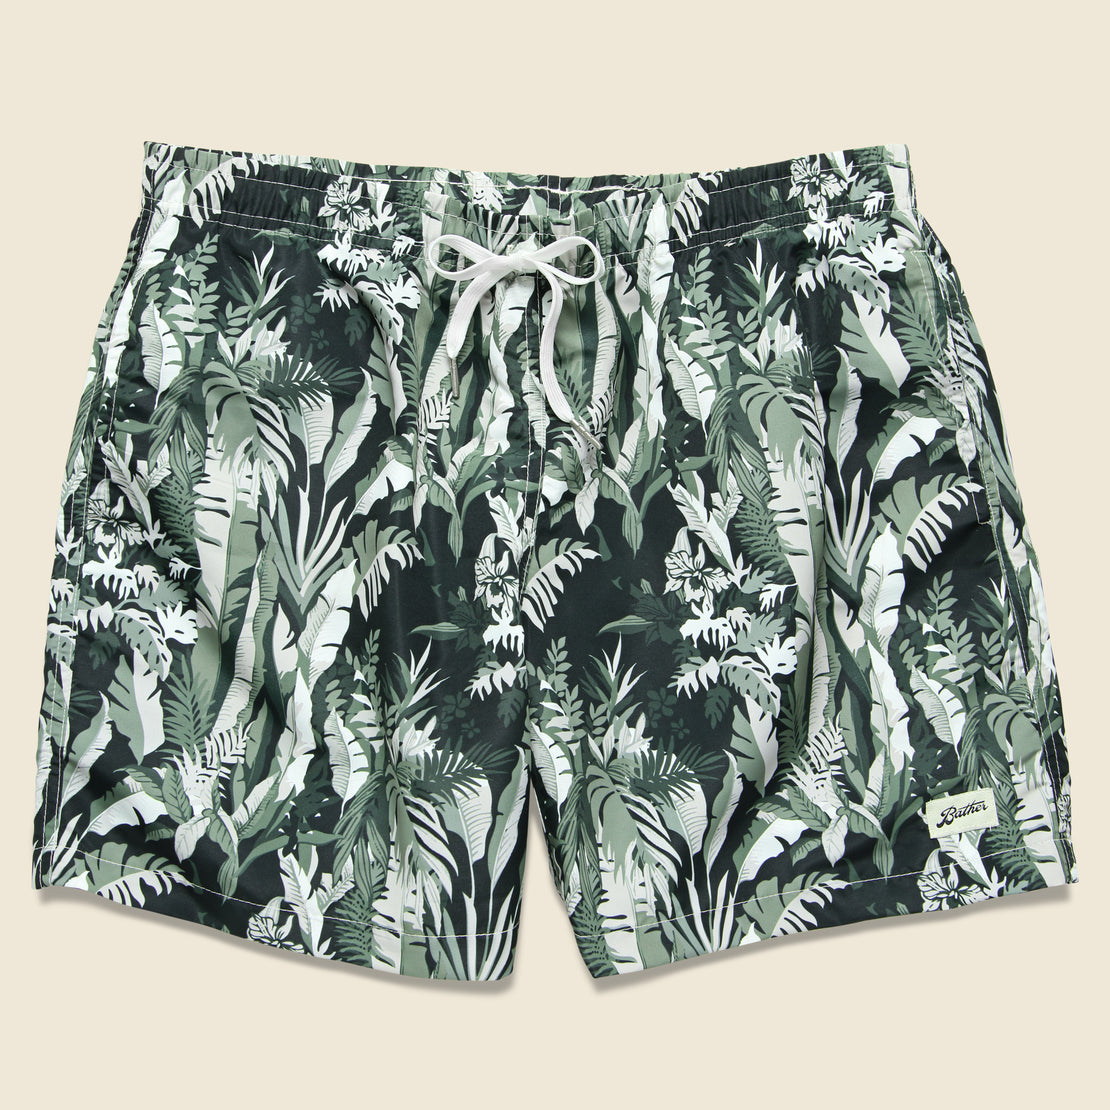 Bather Trunk Co. Tropical Forest Swim Trunk - Green